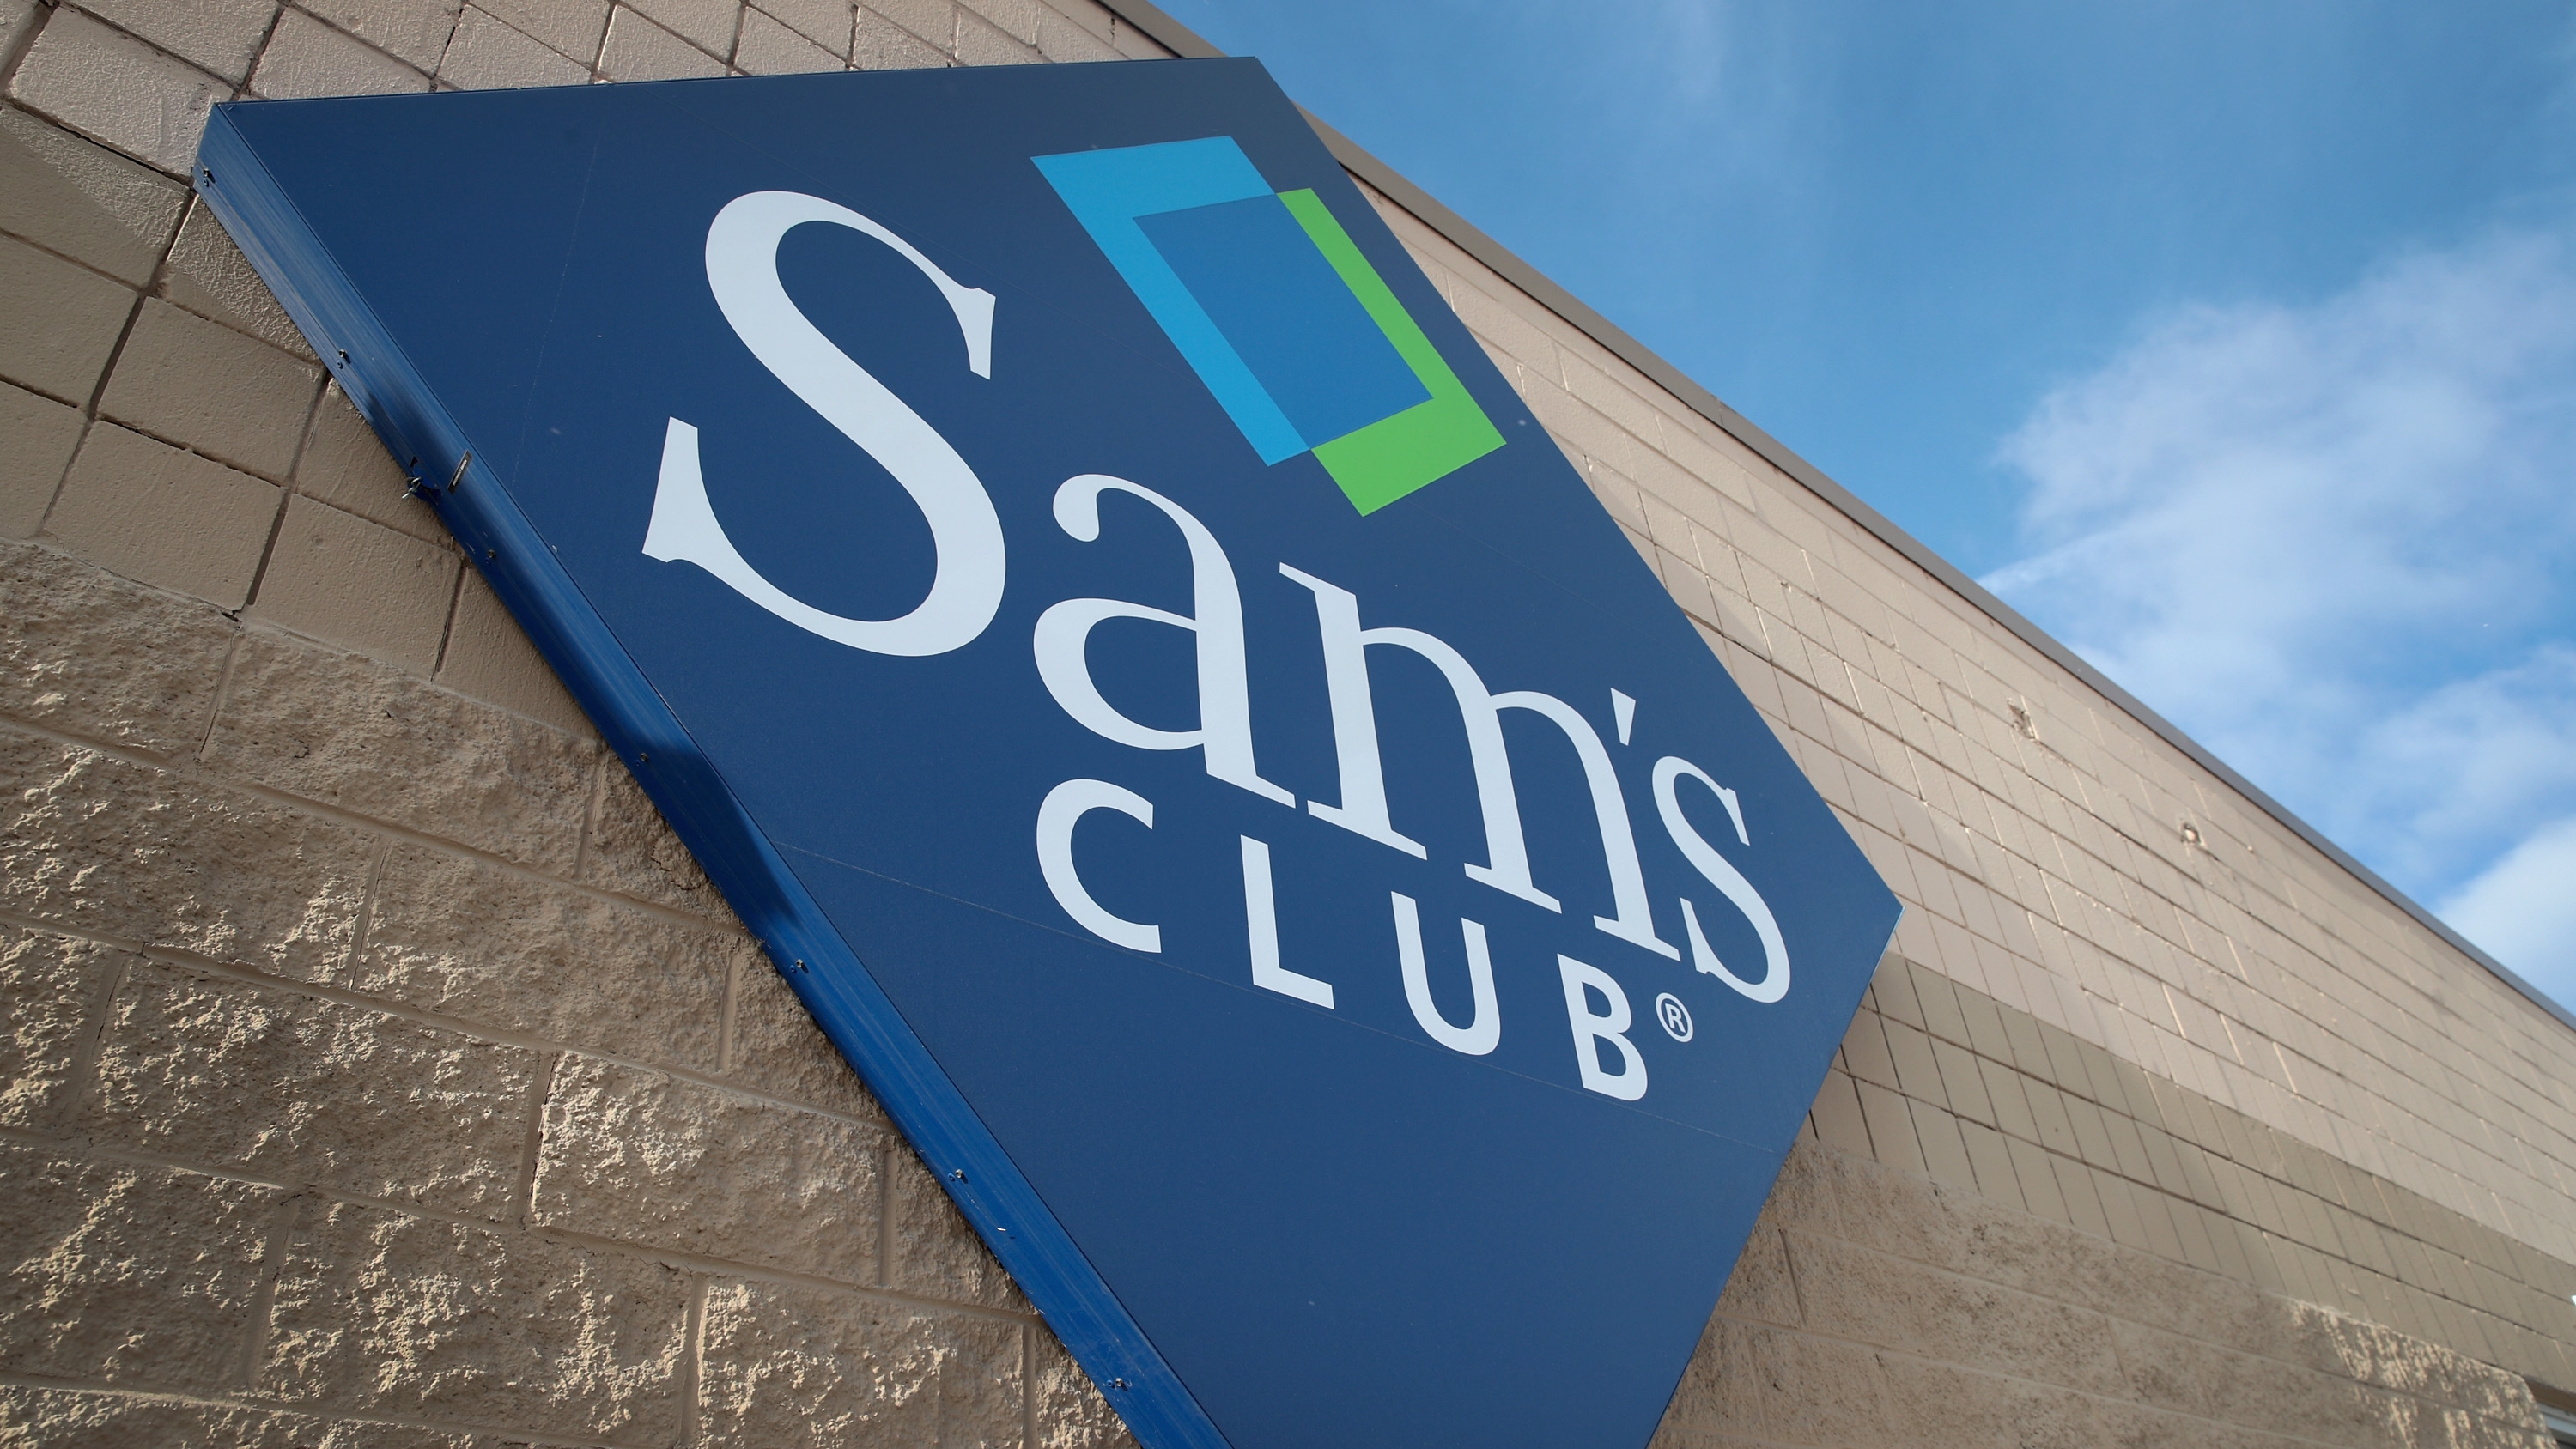 Sam's Club Offering Annual Membership To Teachers For Just $20